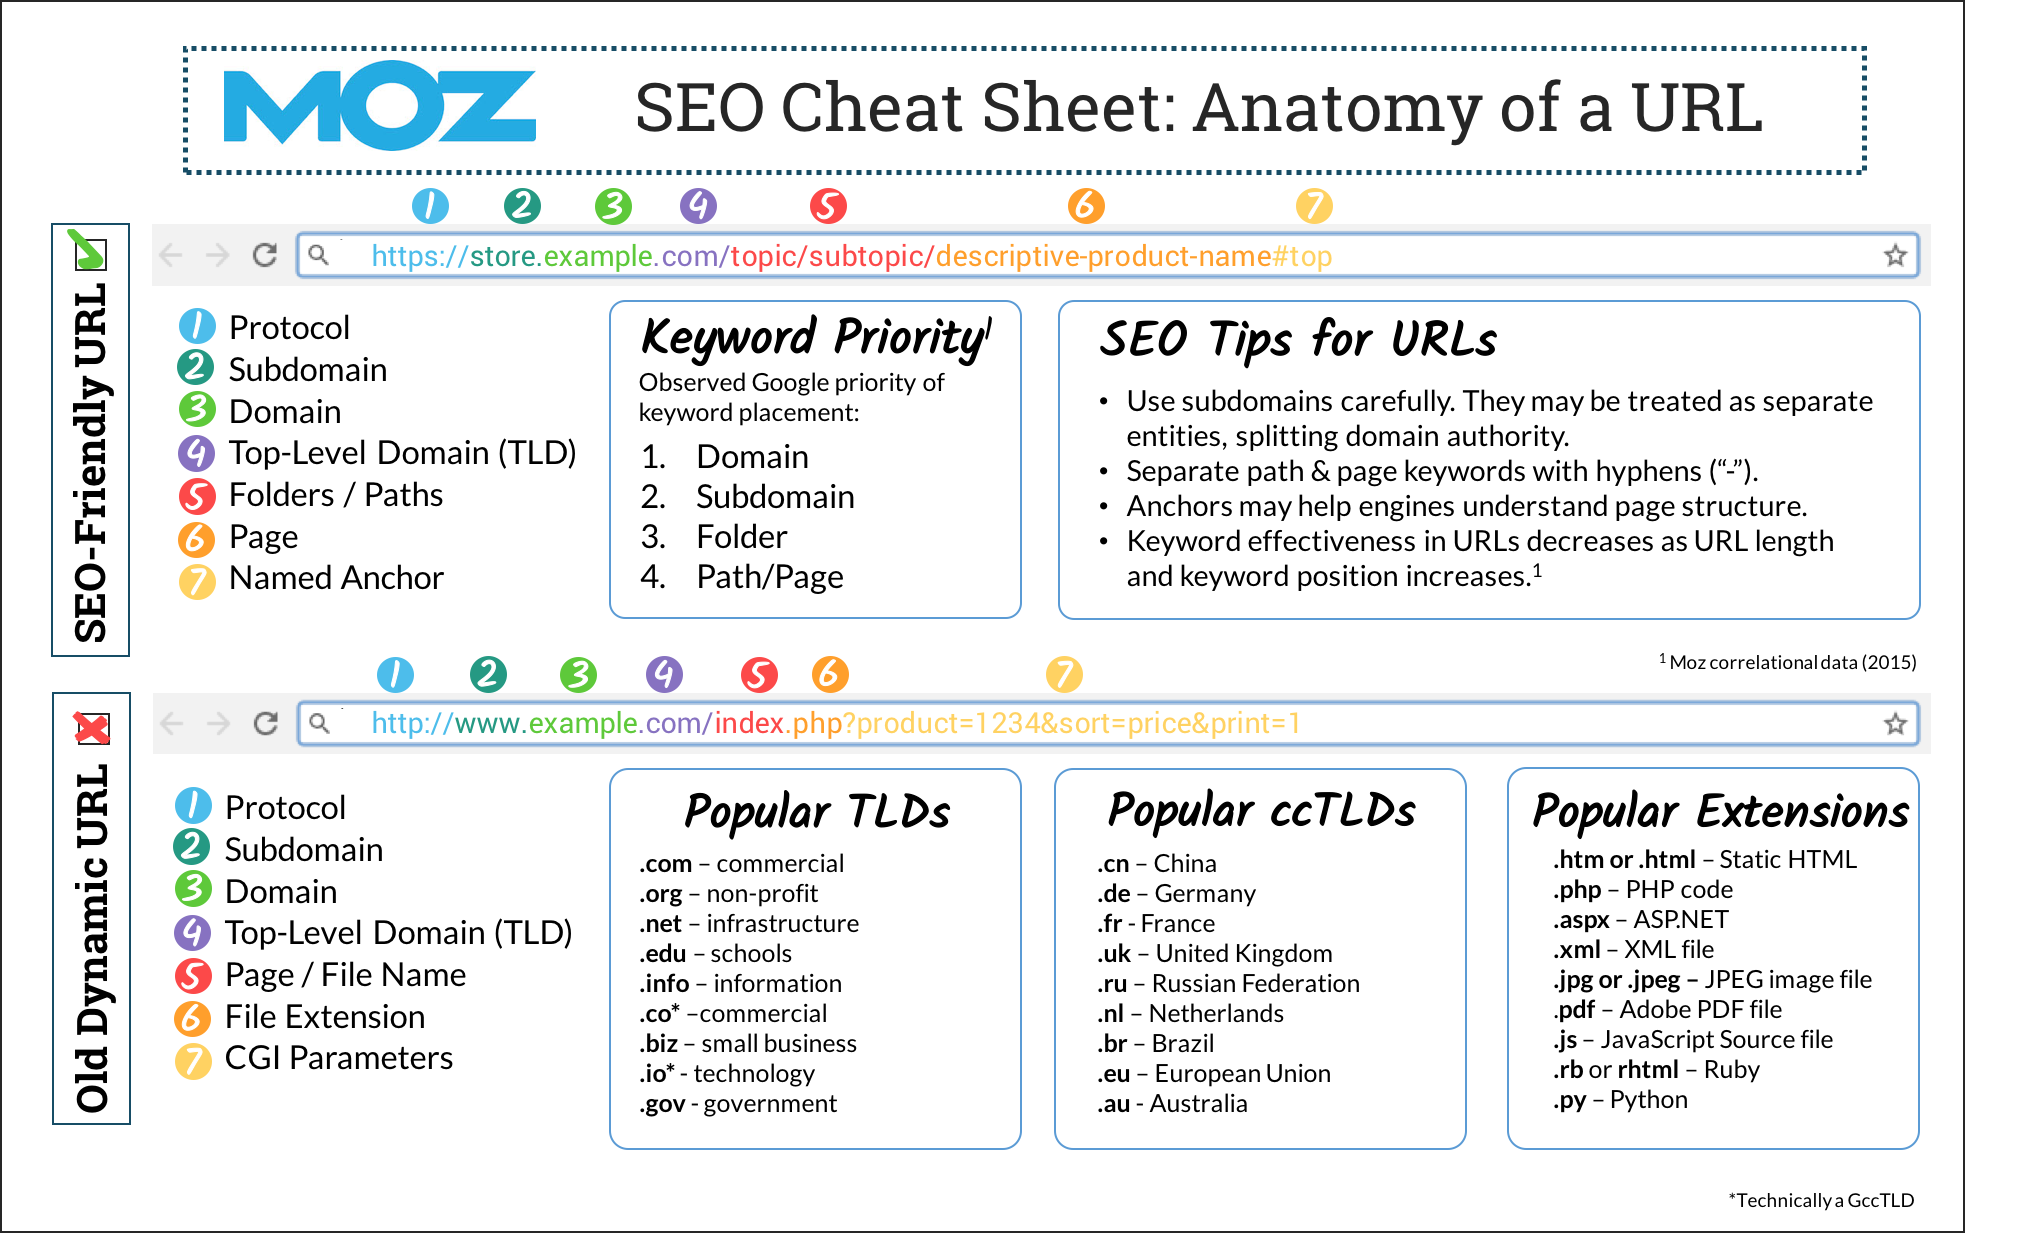 Anatomy-of-a-URL-cheat-sheet_170316_122433.png